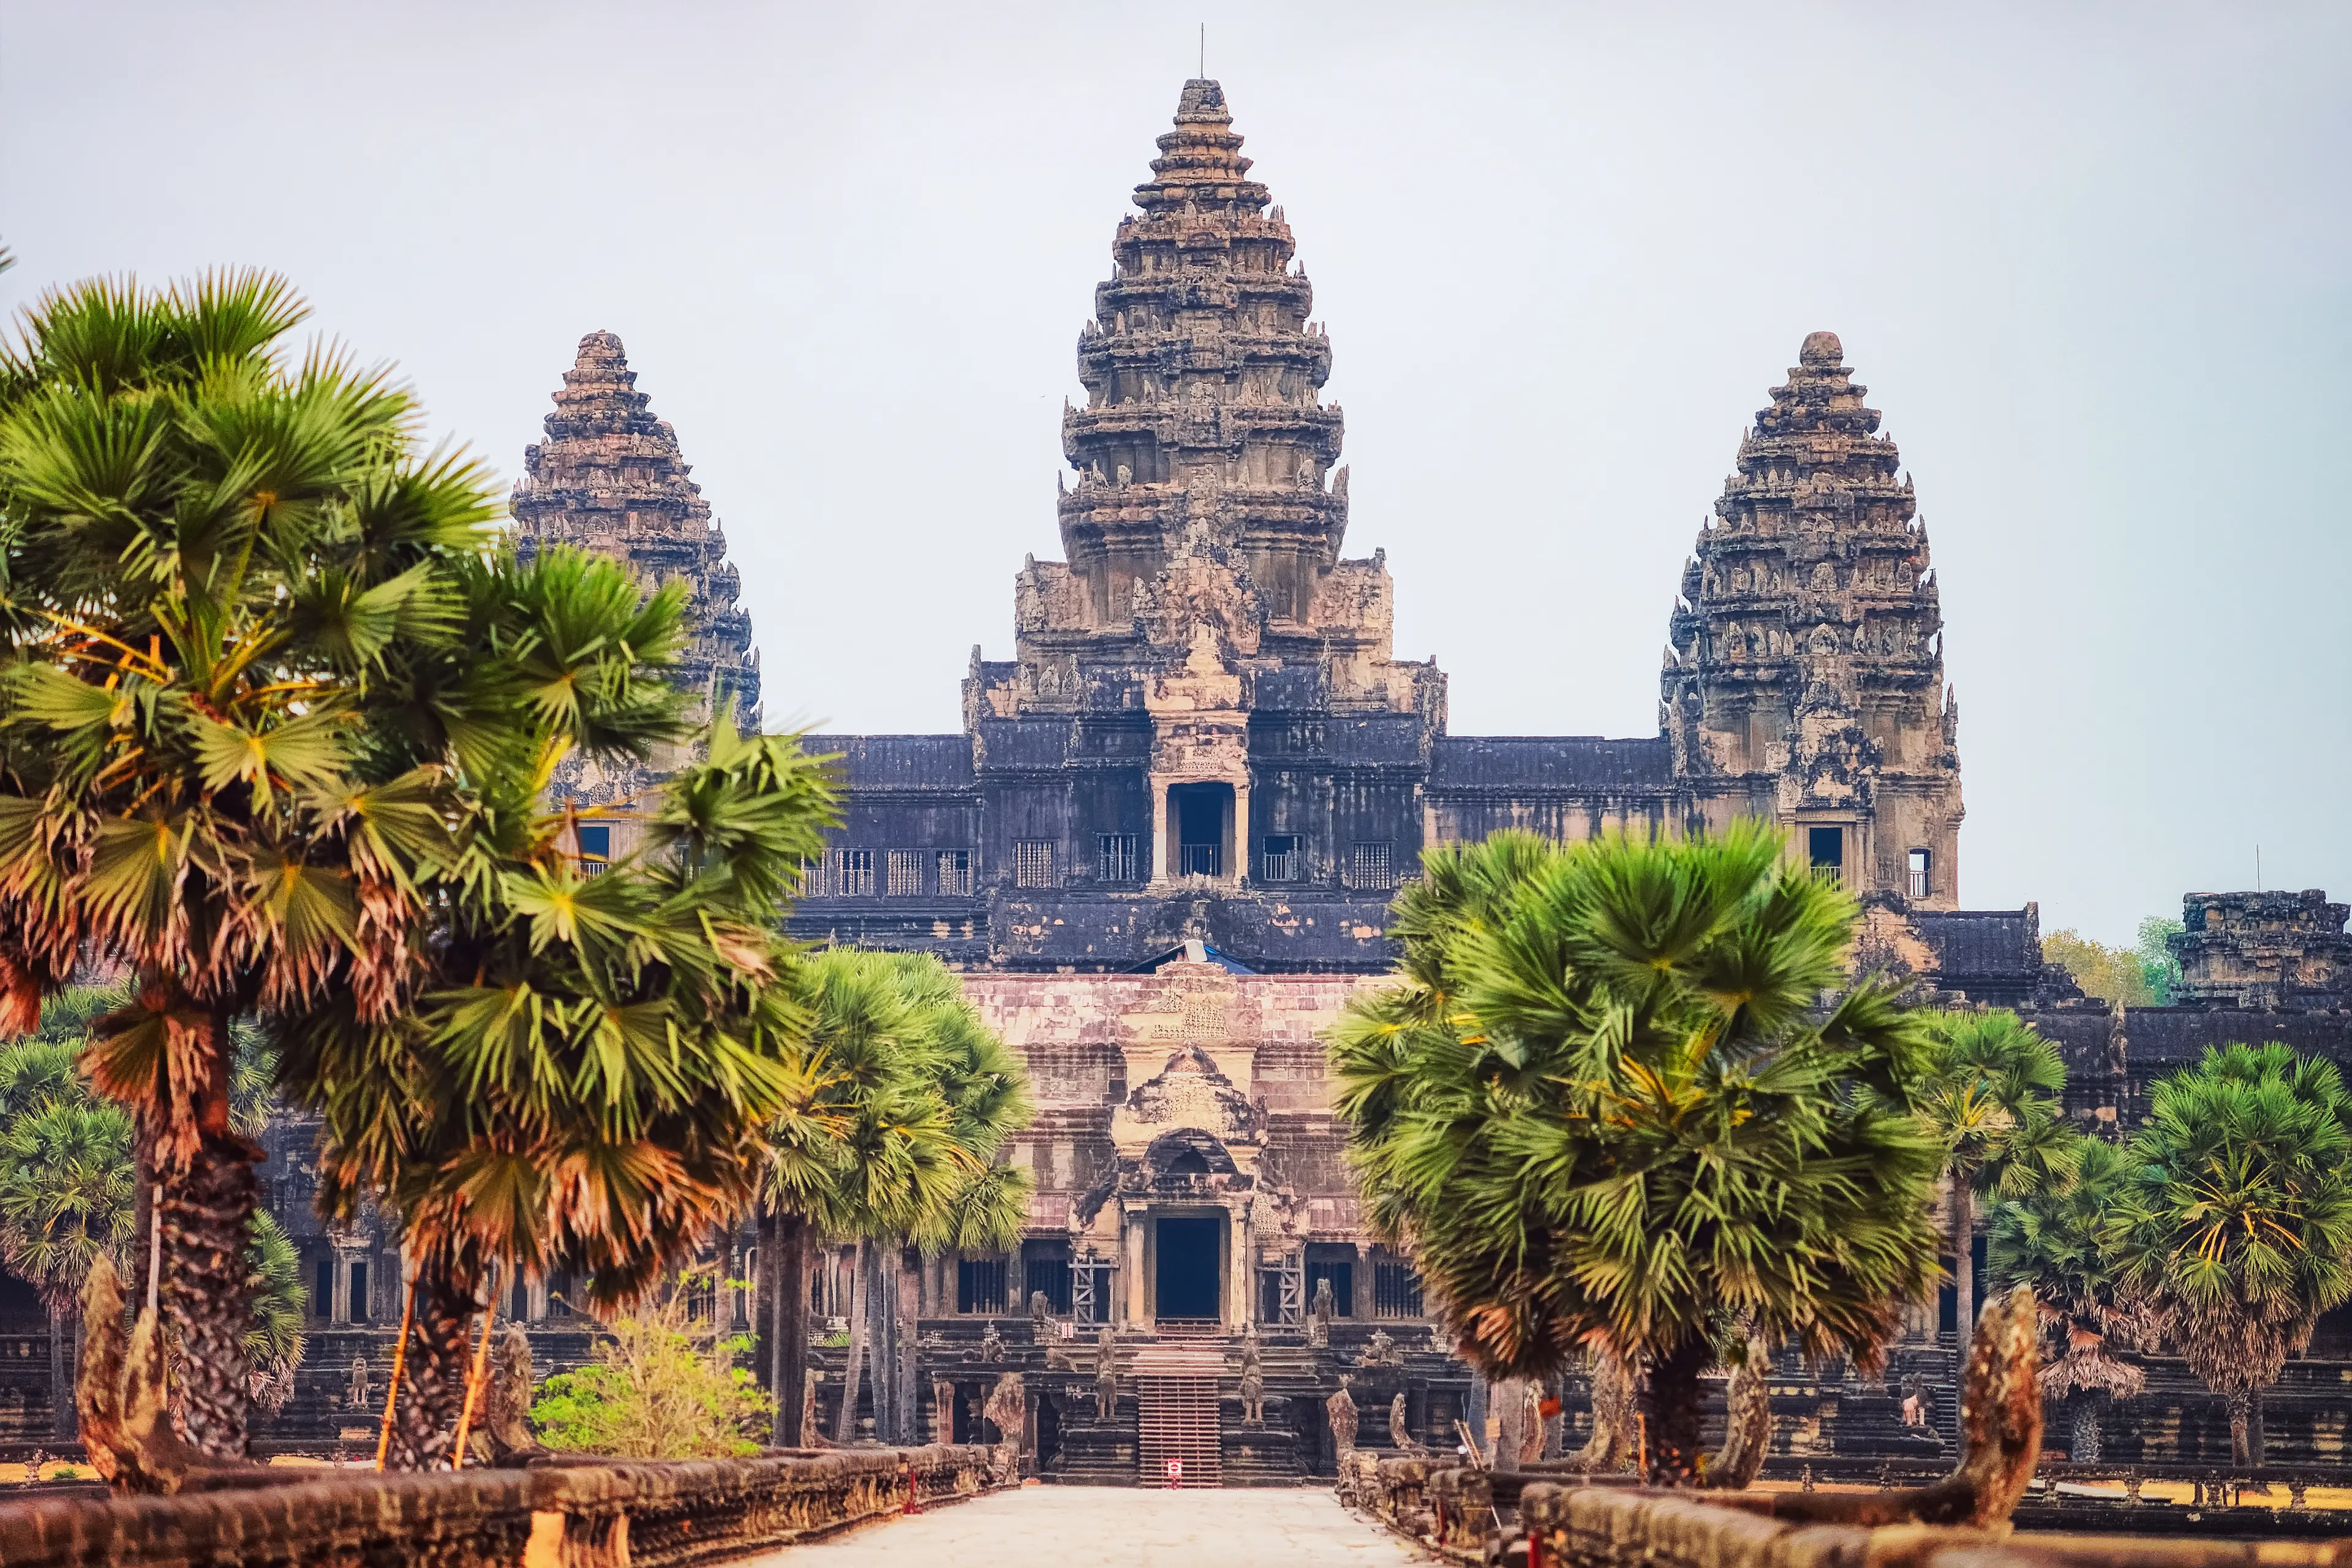 2-Day Local Experience of Angkor Wat: Food, Wine & Shopping Solo Adventure